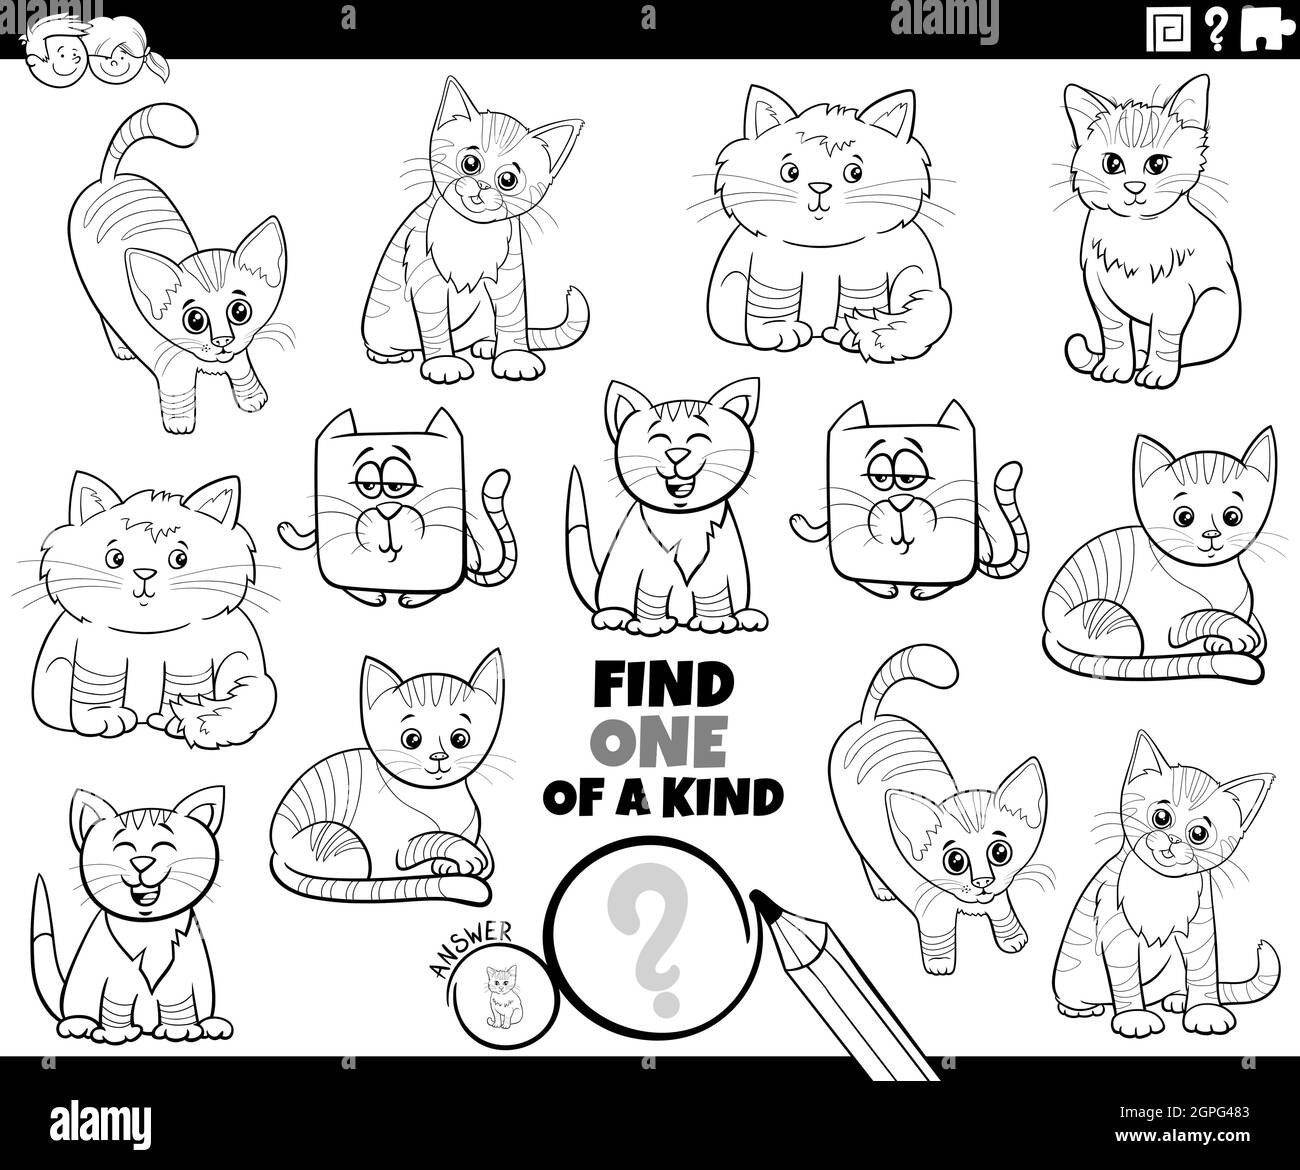 one of a kind task with cute cartoon cats coloring book page Stock Vector